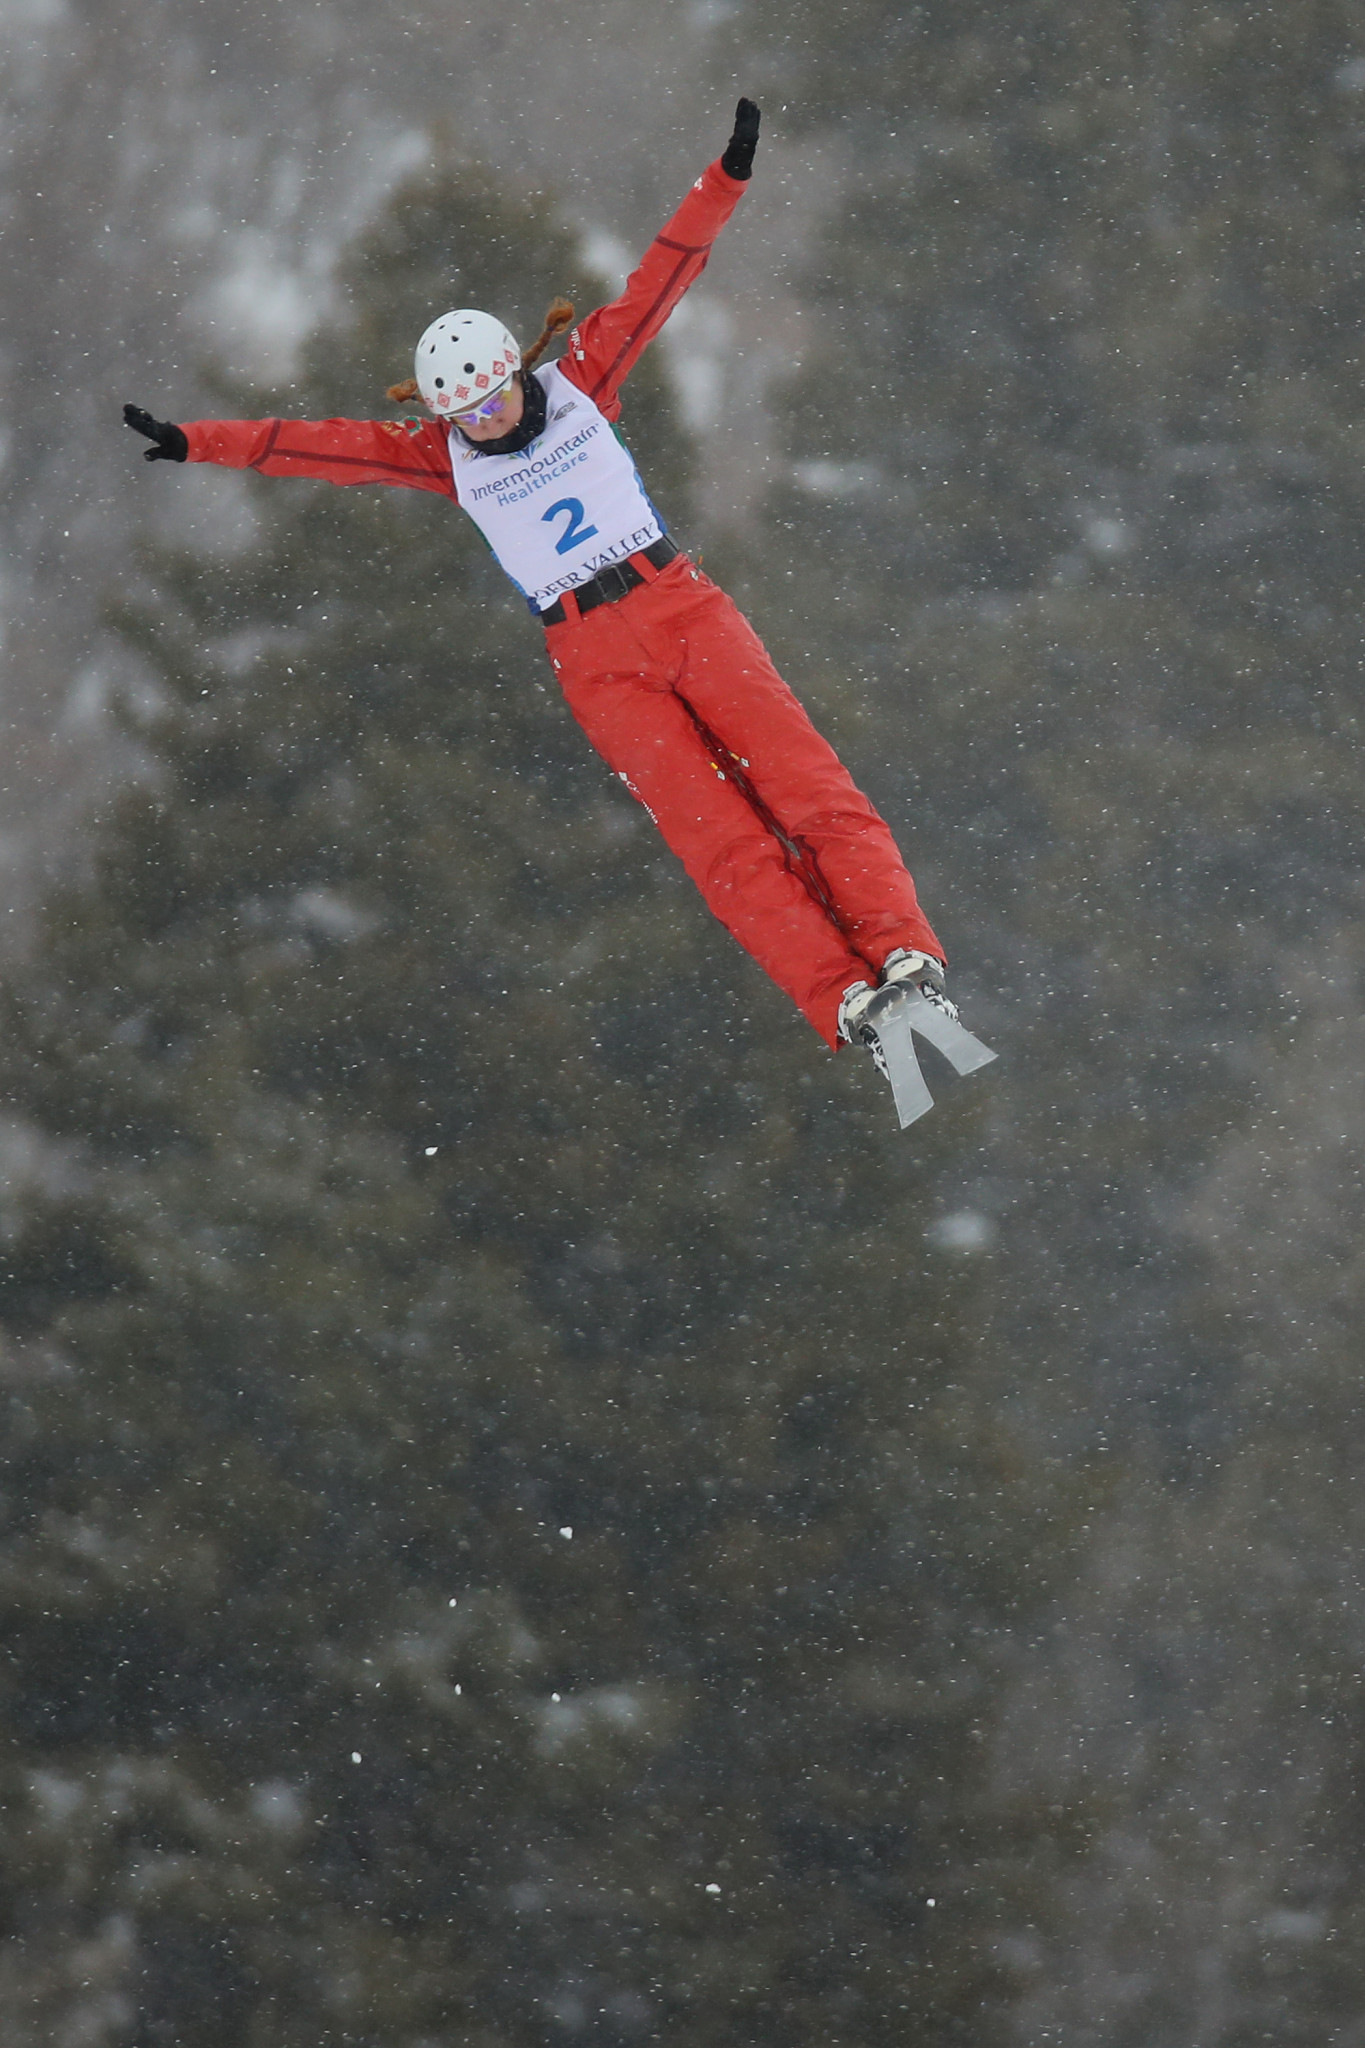 Belarus' Aliaksandra Ramanouskaya is one of the nation's best chances of another World Cup win on home soil ©Getty Images